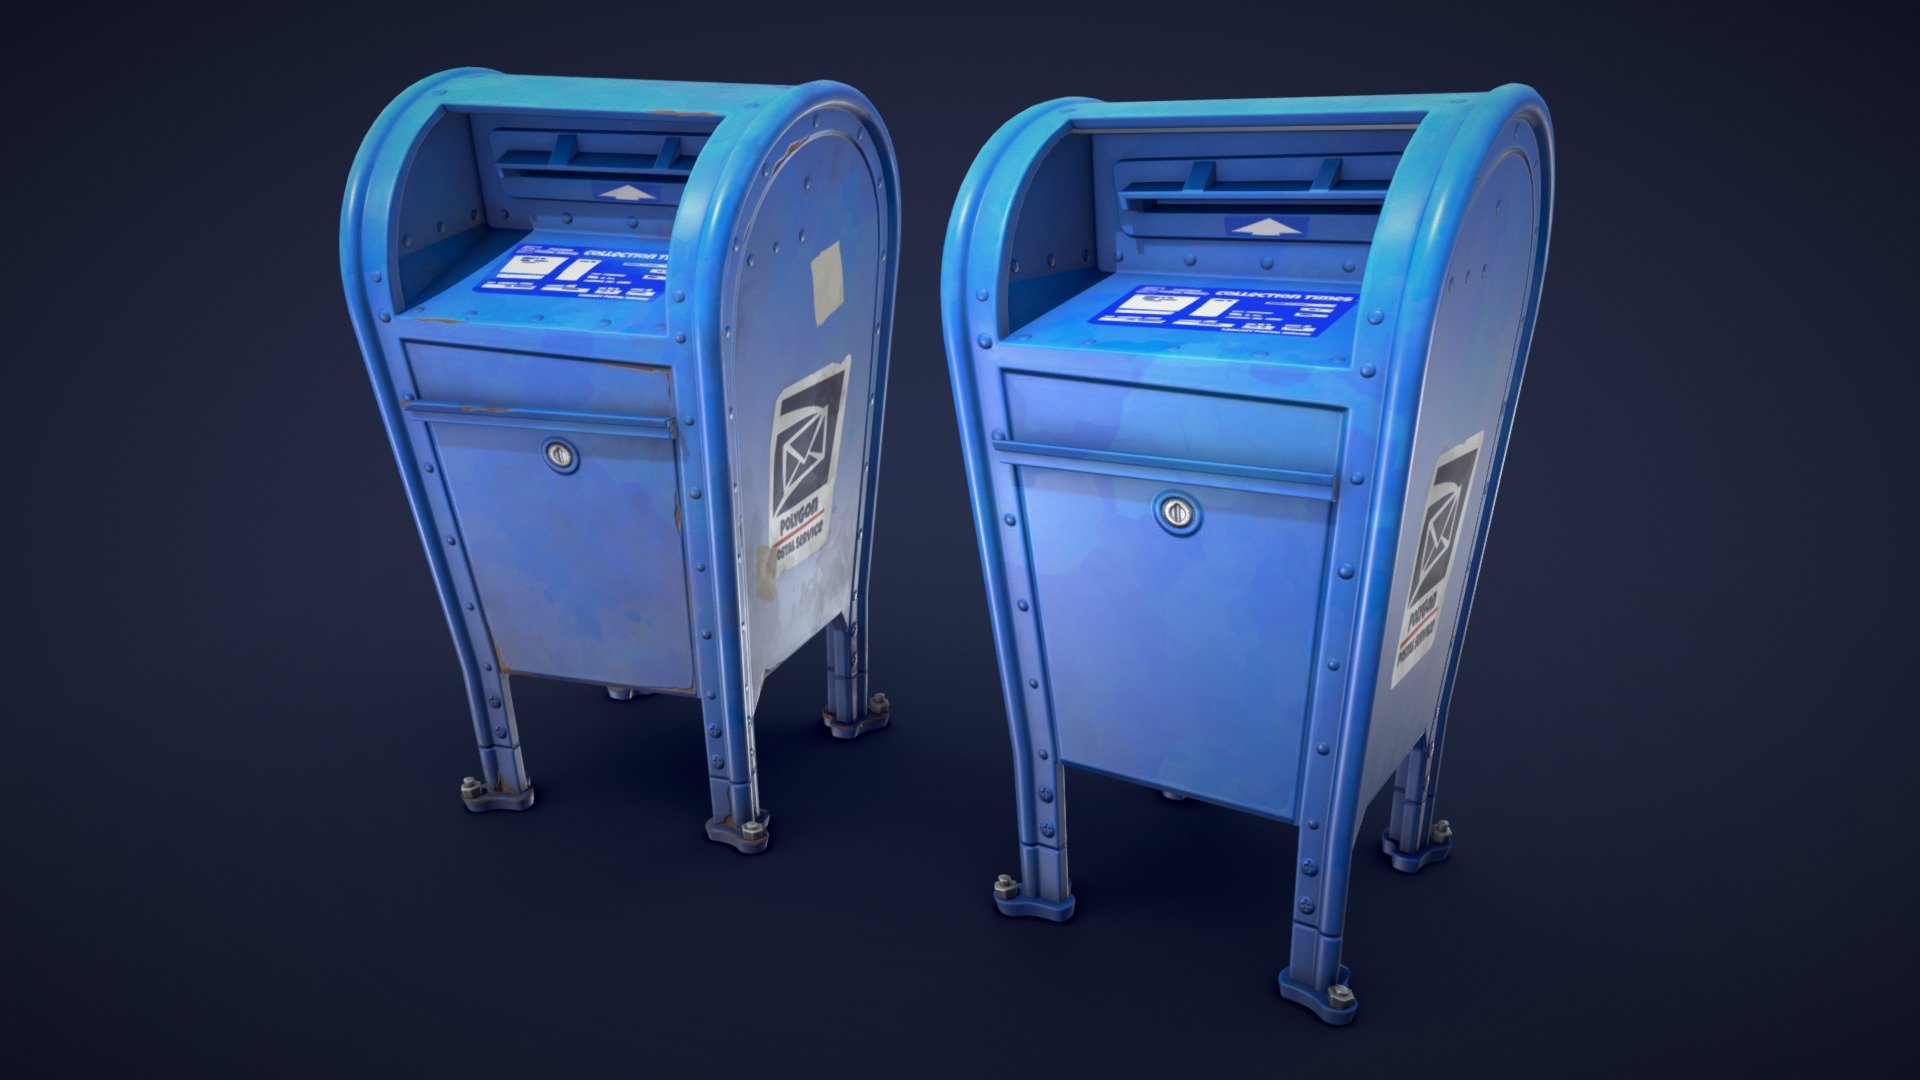 This stylized mailbox model pack is featuring two different models and textures: clean and dirty.
Whether you want to create a modern urban city scene or a post-apocalyptic wasteland, this stylized mailbox model will add some personality and detail to your project. 

Model information:




Optimized low-poly assets for real-time usage.

2K and 4K textures for the assets are included.

2 variation textures are included (clean and dirty).

Optimized and clean UV mapping.

Compatible with Unreal Engine, Unity and similar engines.

All assets are included in a separate file as well.
 - Stylized Mailbox - Low Poly - Buy Royalty Free 3D model by Lars Korden (@Lark.Art) 3d model